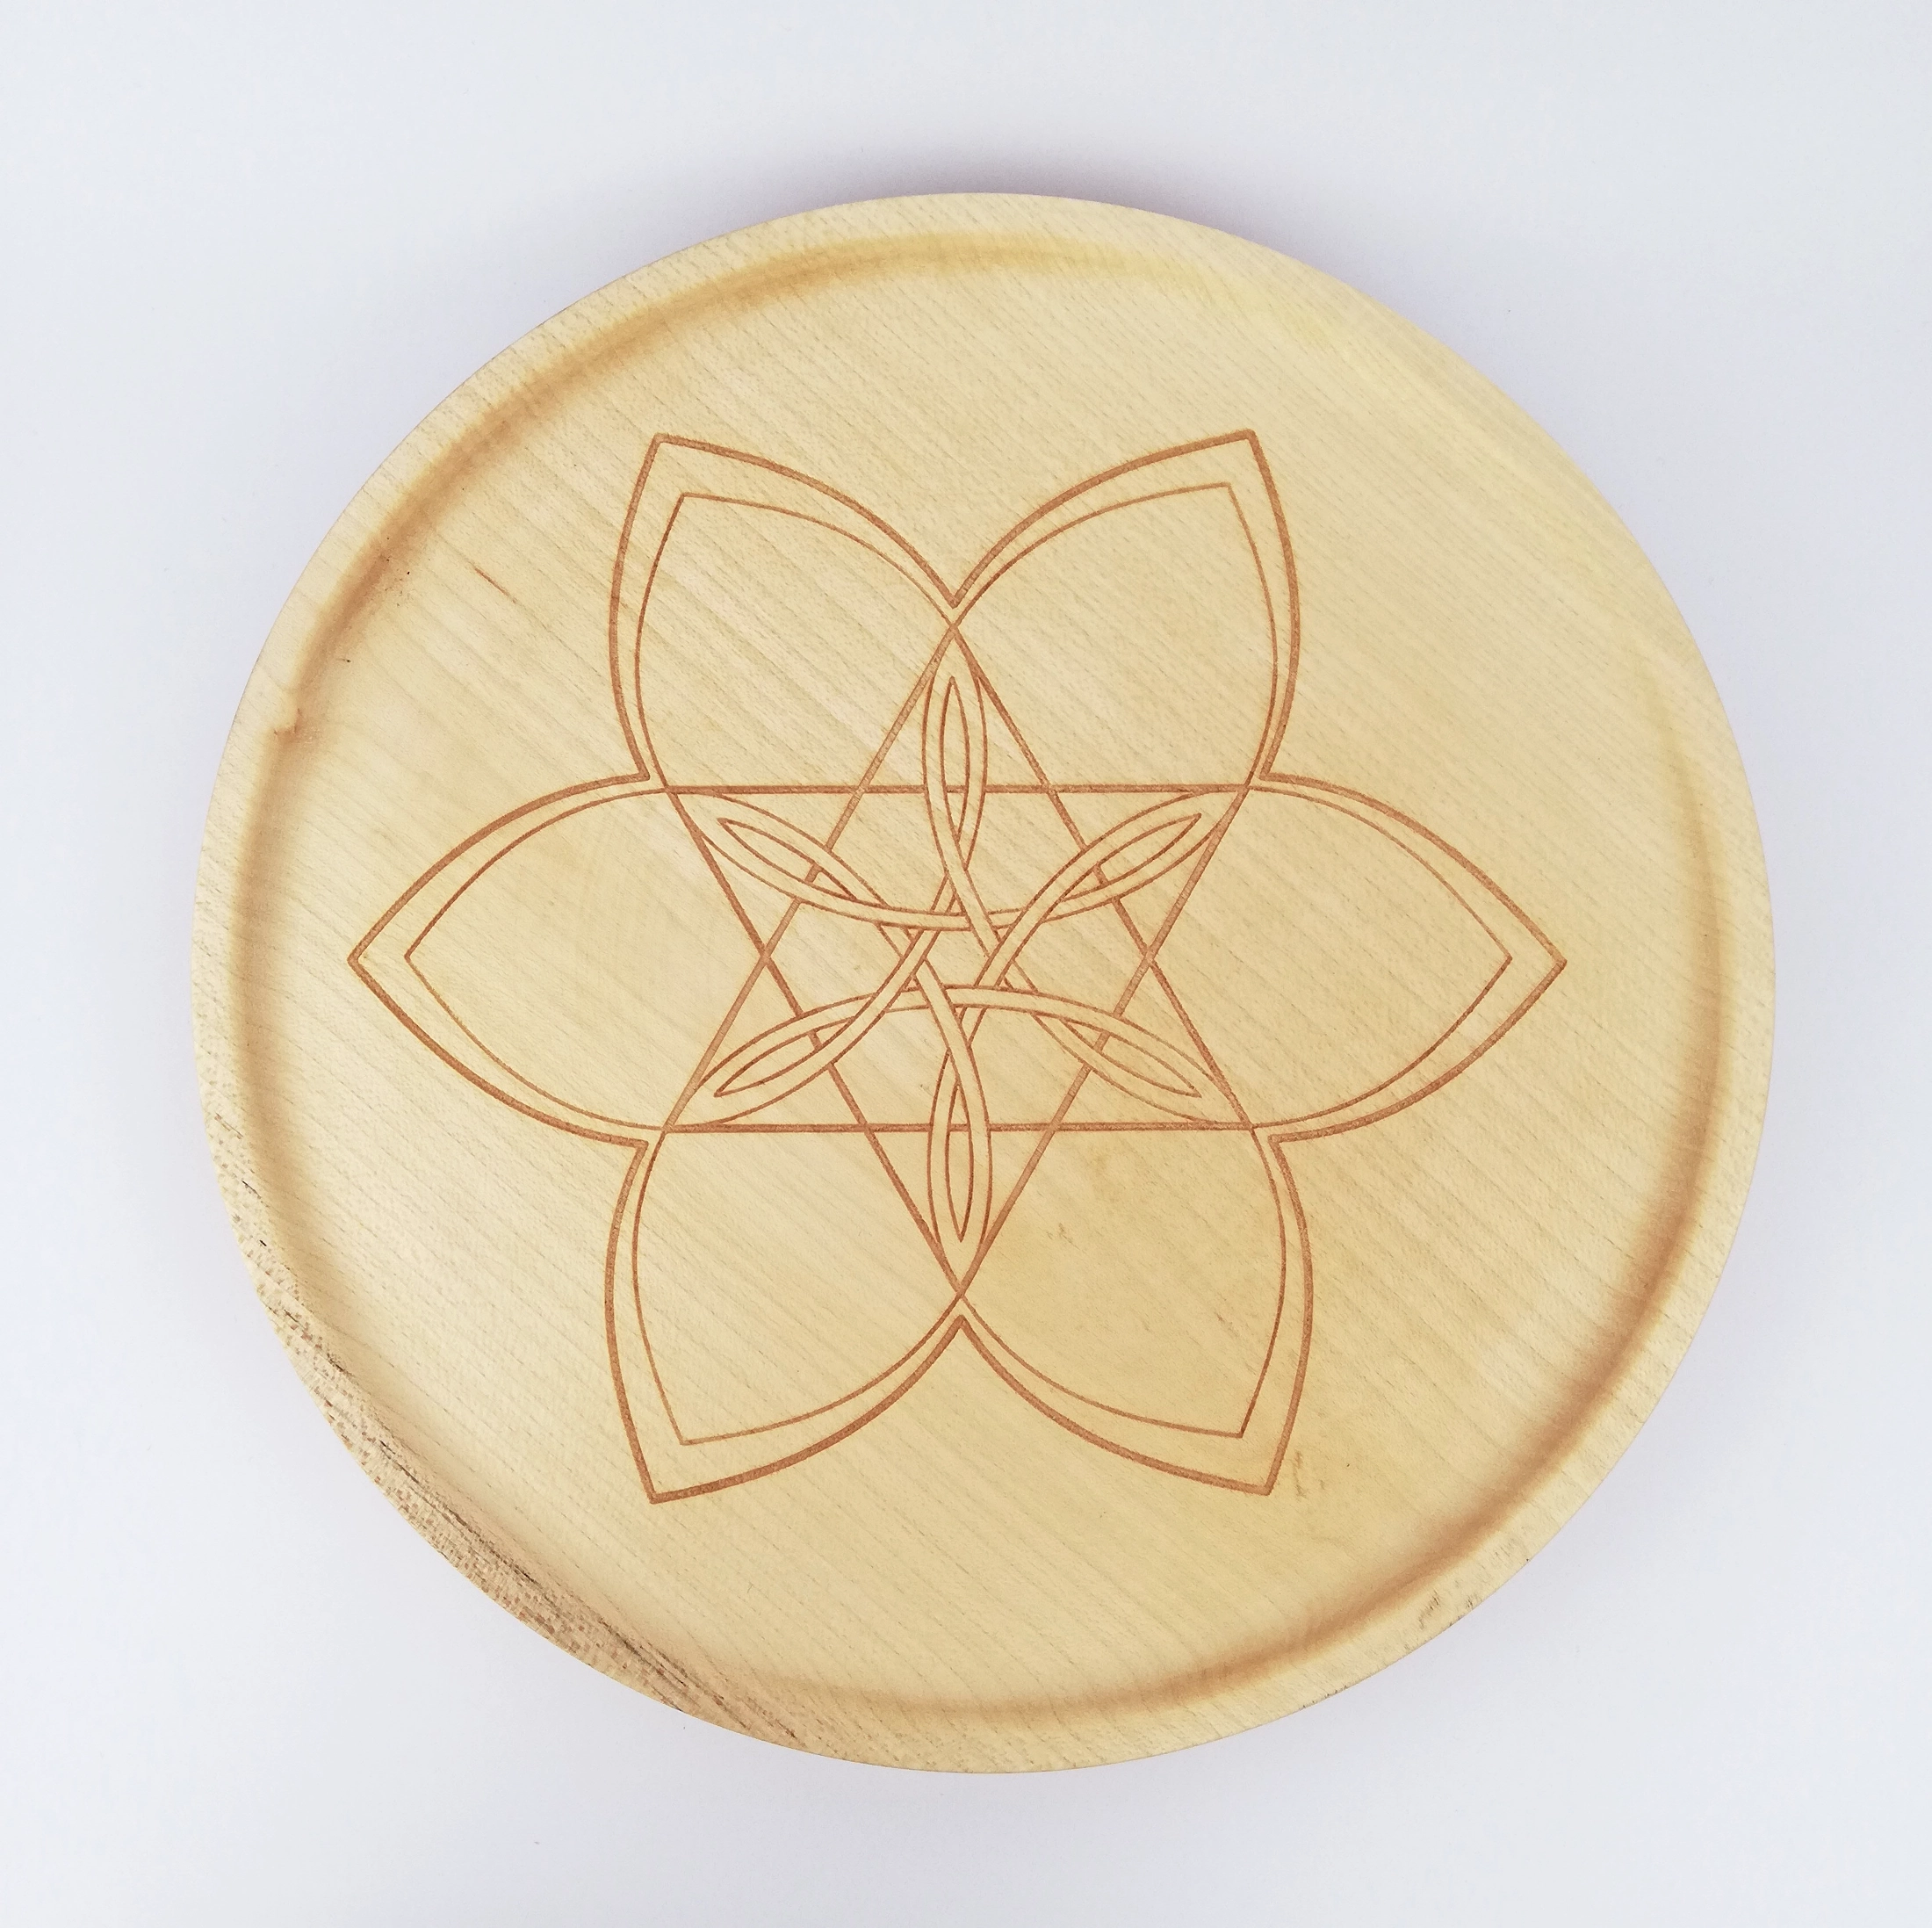 Hexagram (version 2) on a middle plate (24cm/9.4in in diameter), front.